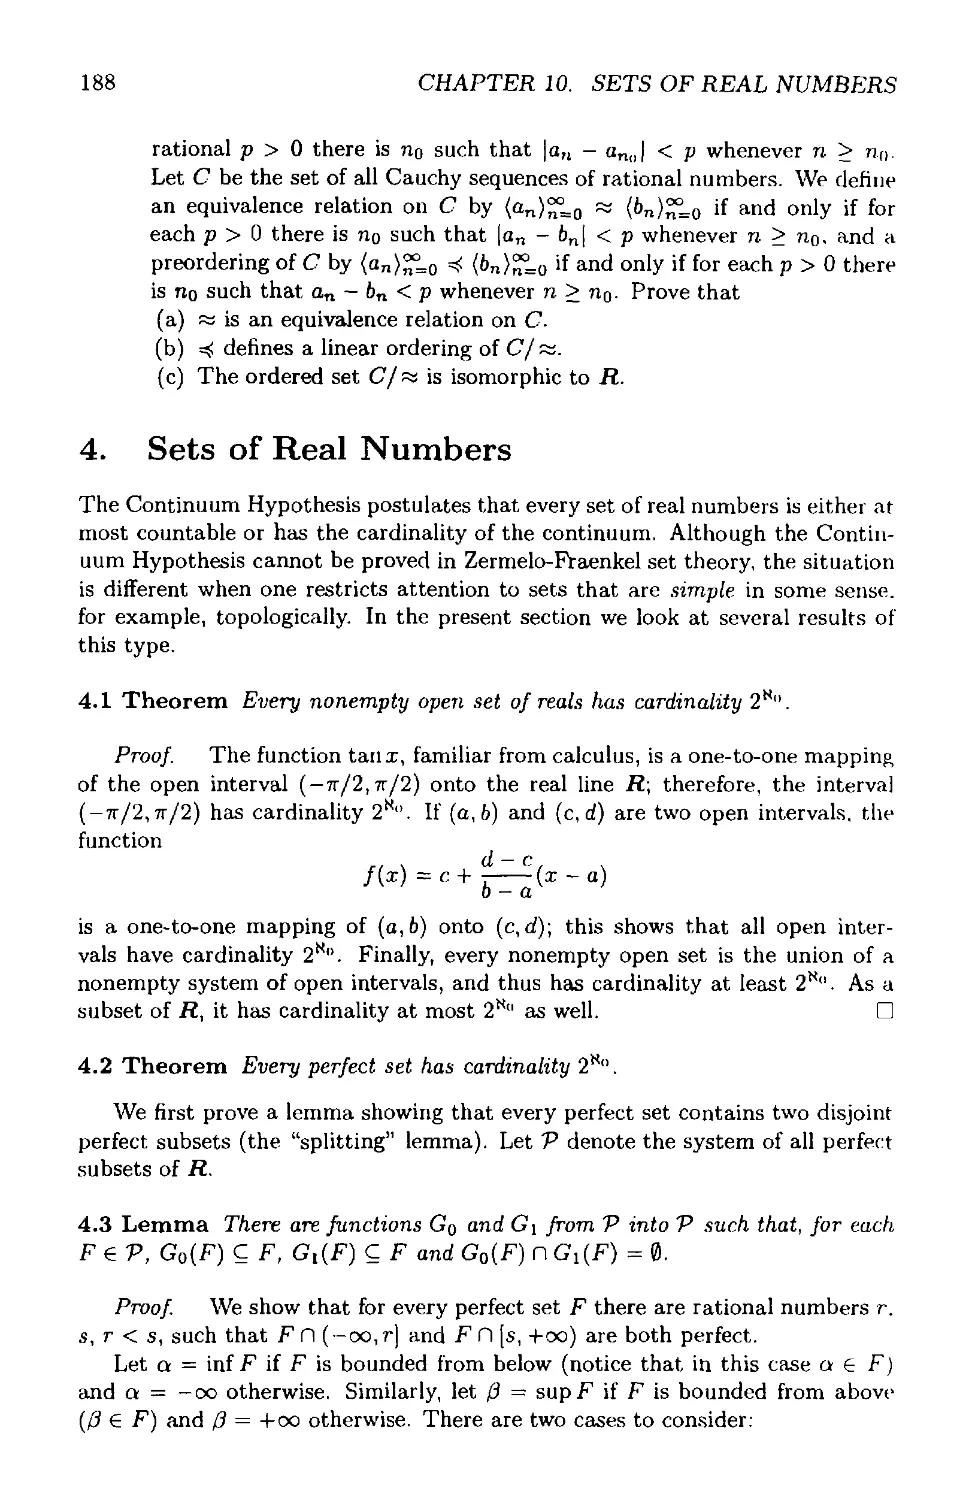 4 Sets of Real Numbers